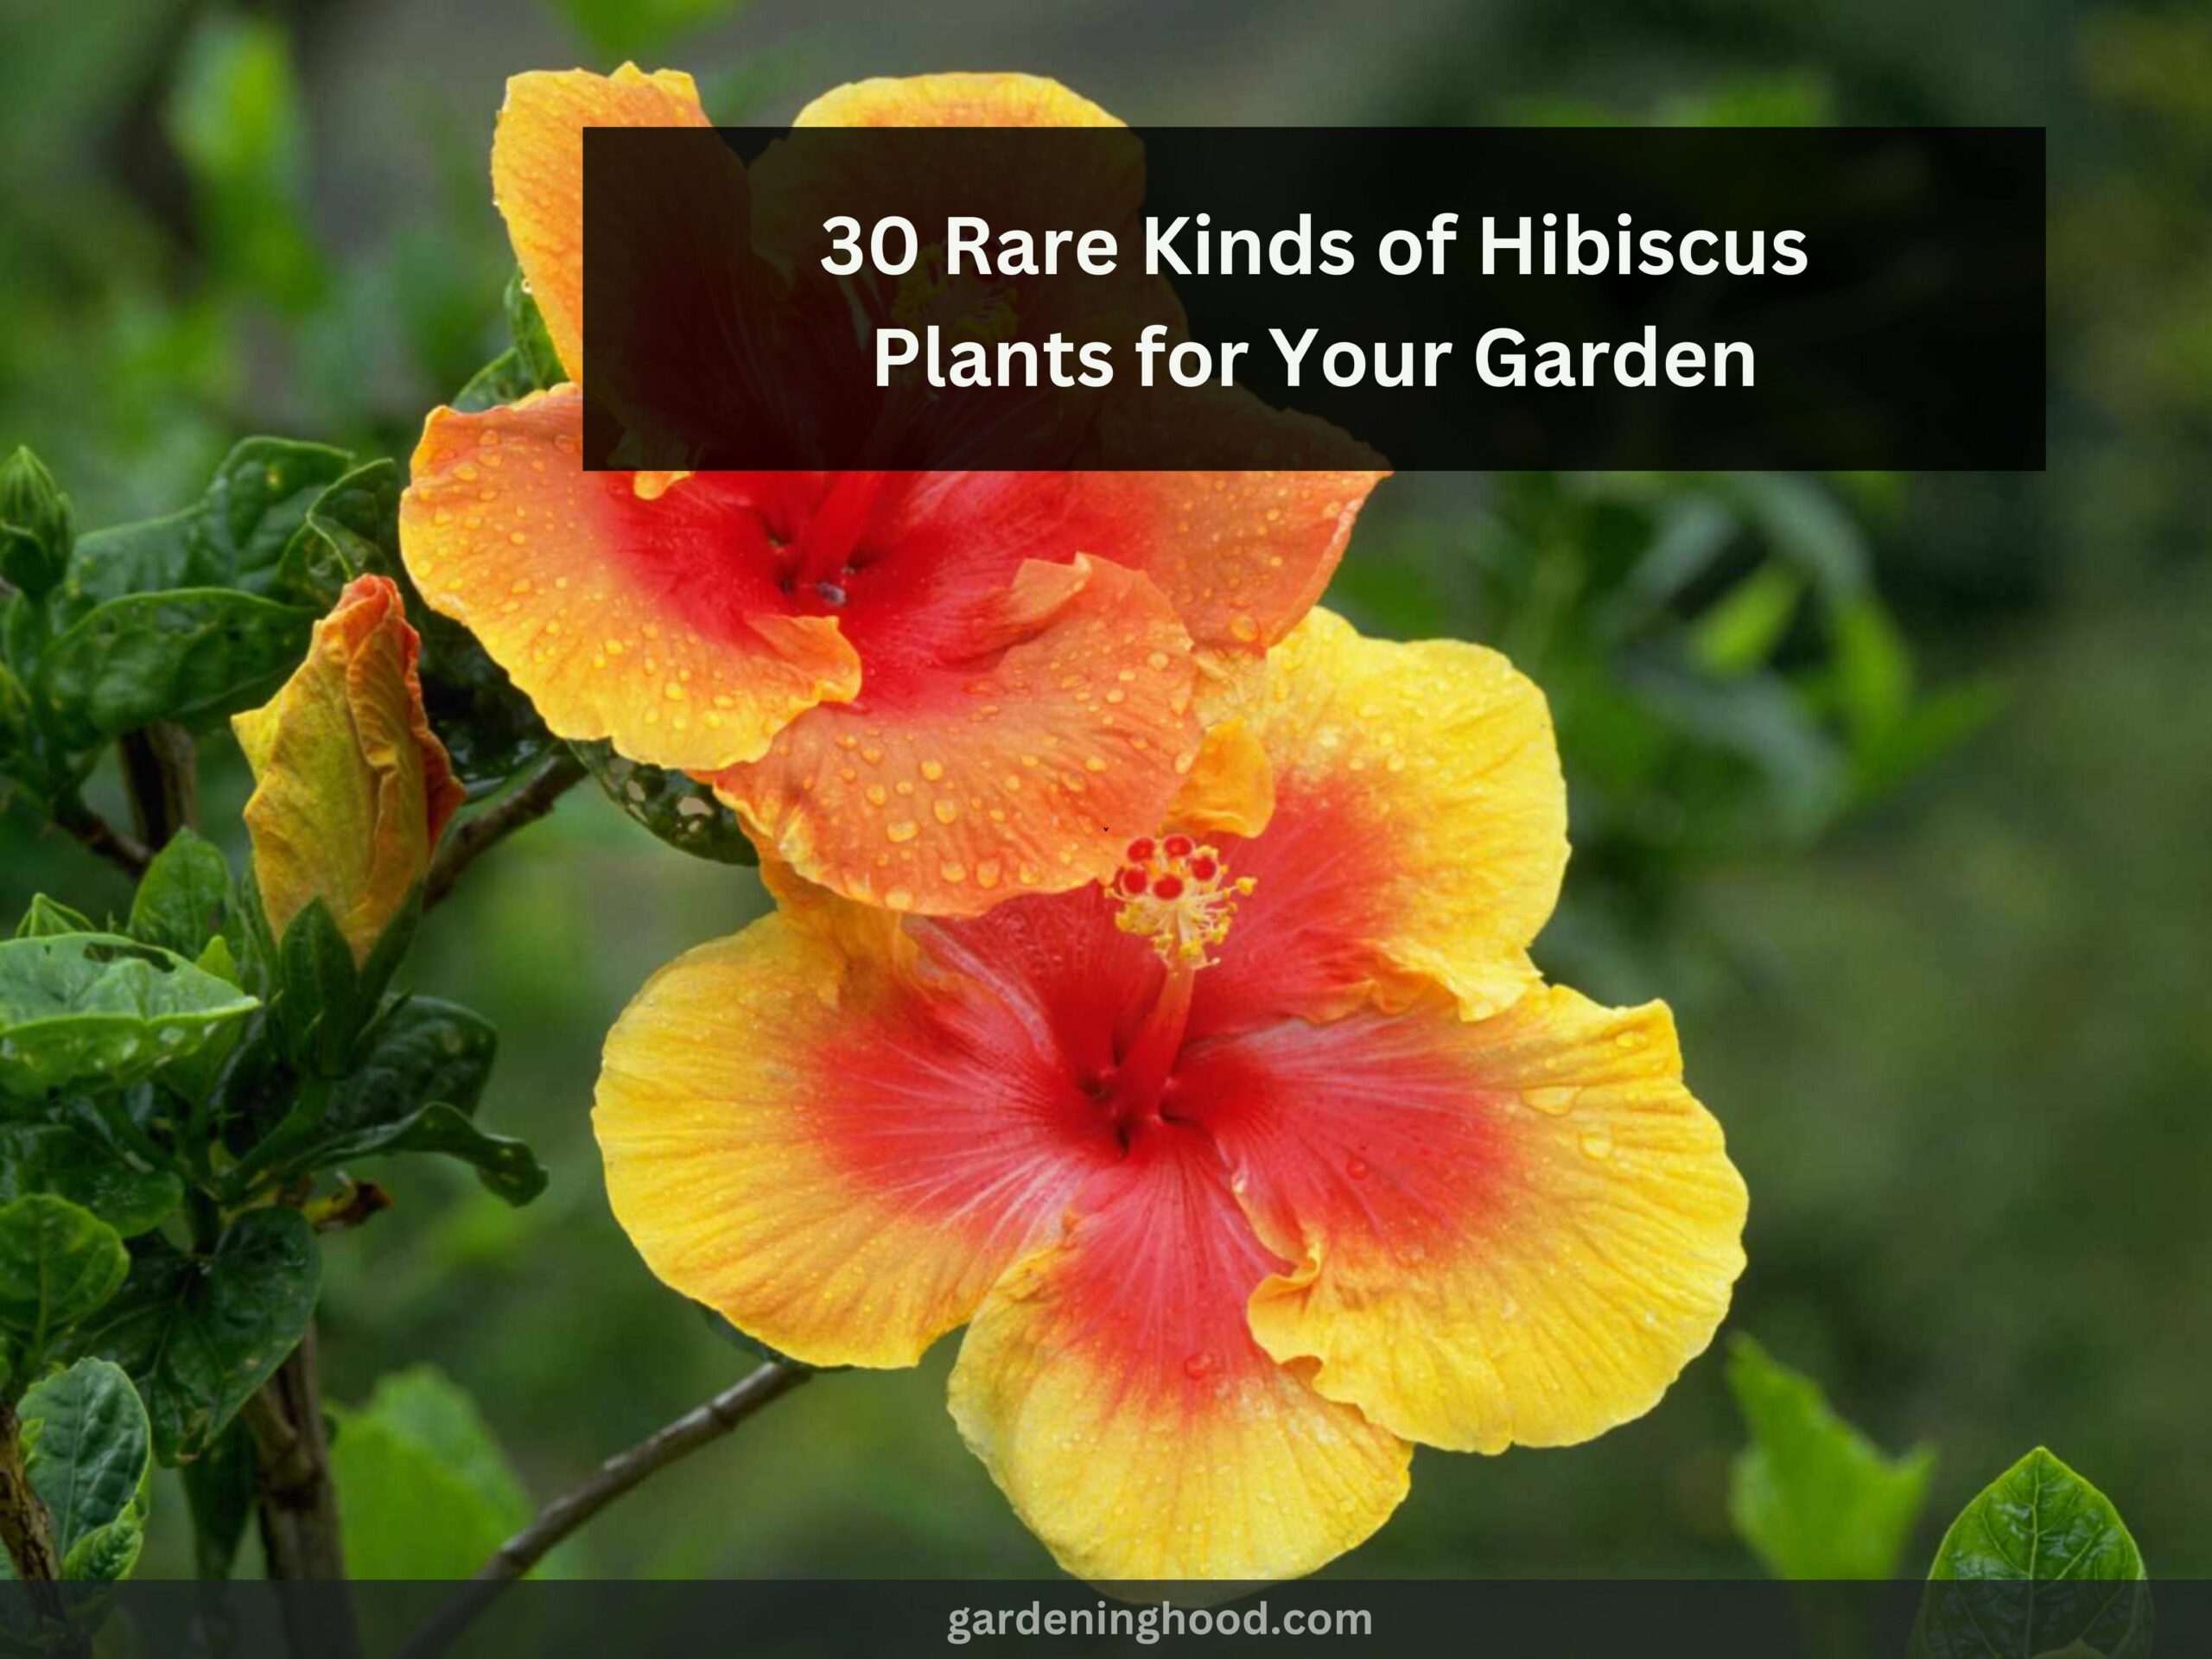 30 Rare Kinds of Hibiscus Plants for Your Garden